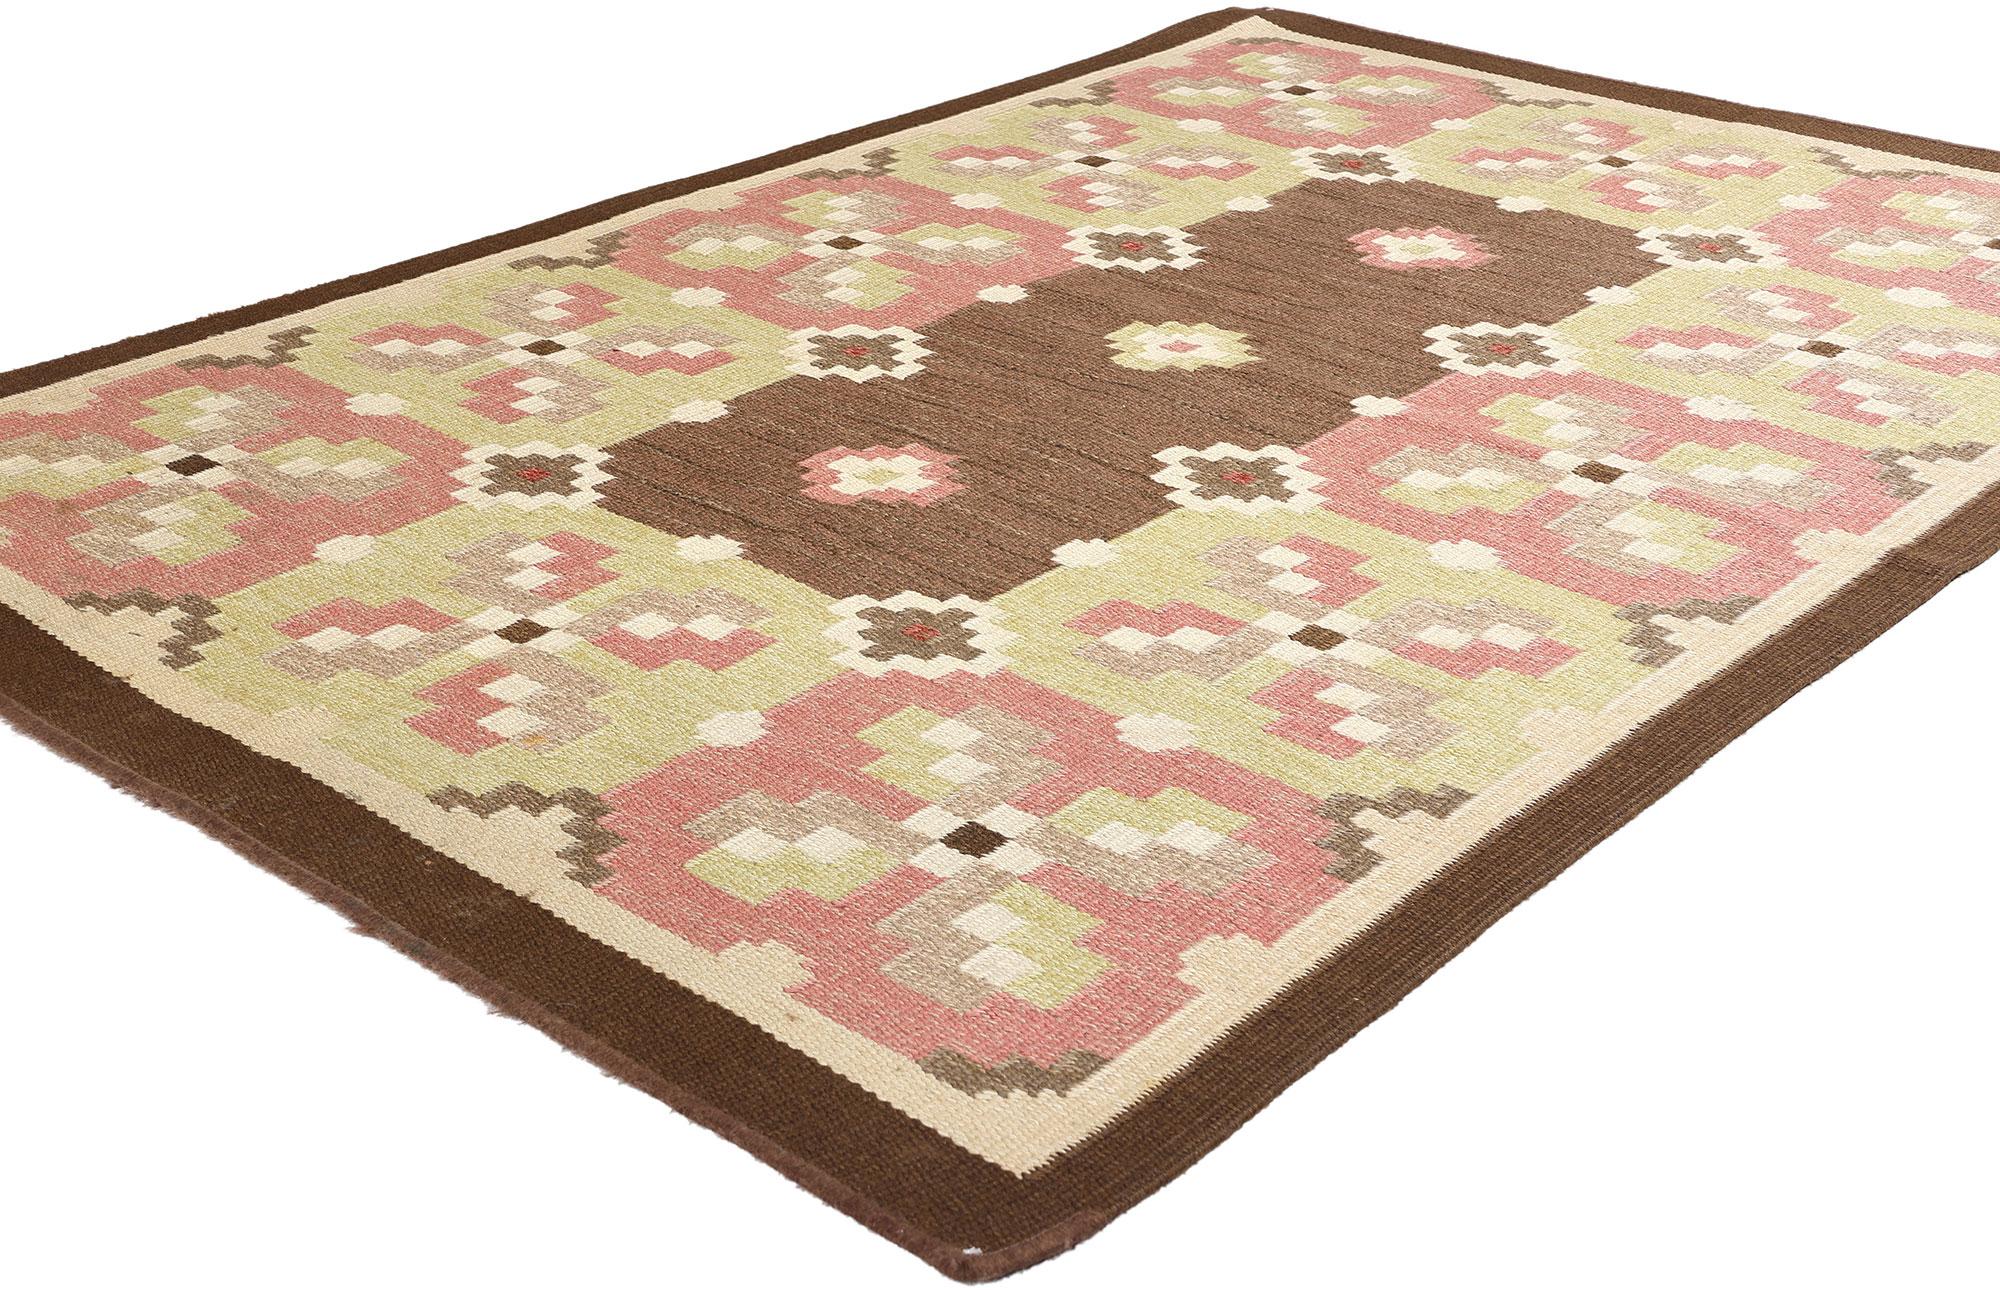 78248 Erik Lundberg Vintage Swedish Rollakan Rug, 04'07 x 06'09. Erik Lundberg, the Swedish weaver behind Vavaregarden, which translates to Weavers Farm, enlisted local weavers in Malmo, during the 1960s to create hand-woven flat-weave 